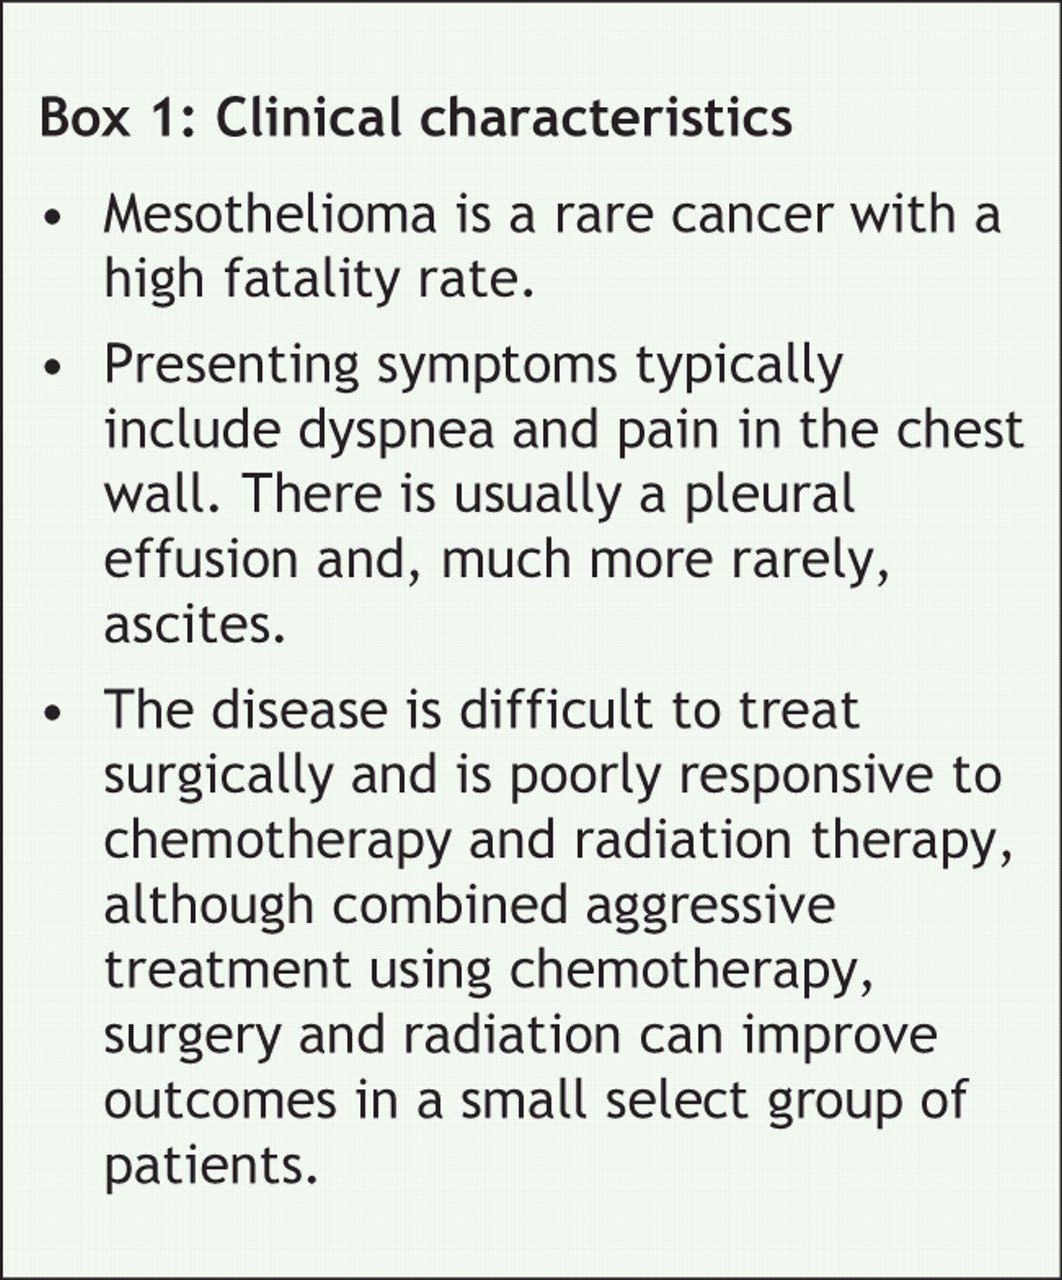 Mesothelioma - At a Glance